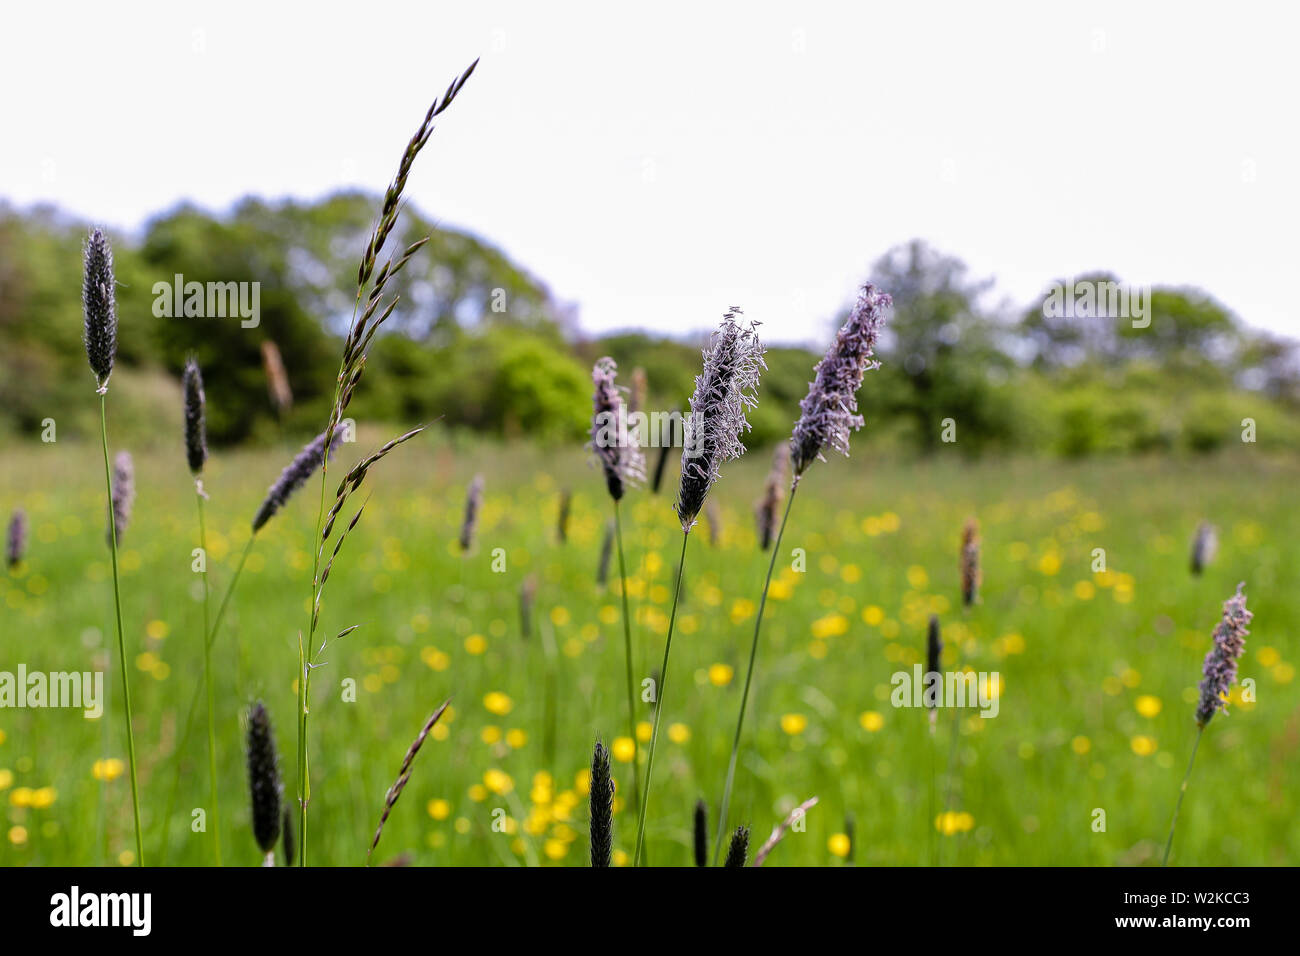 Meadow foxtail on a grassland Stock Photo